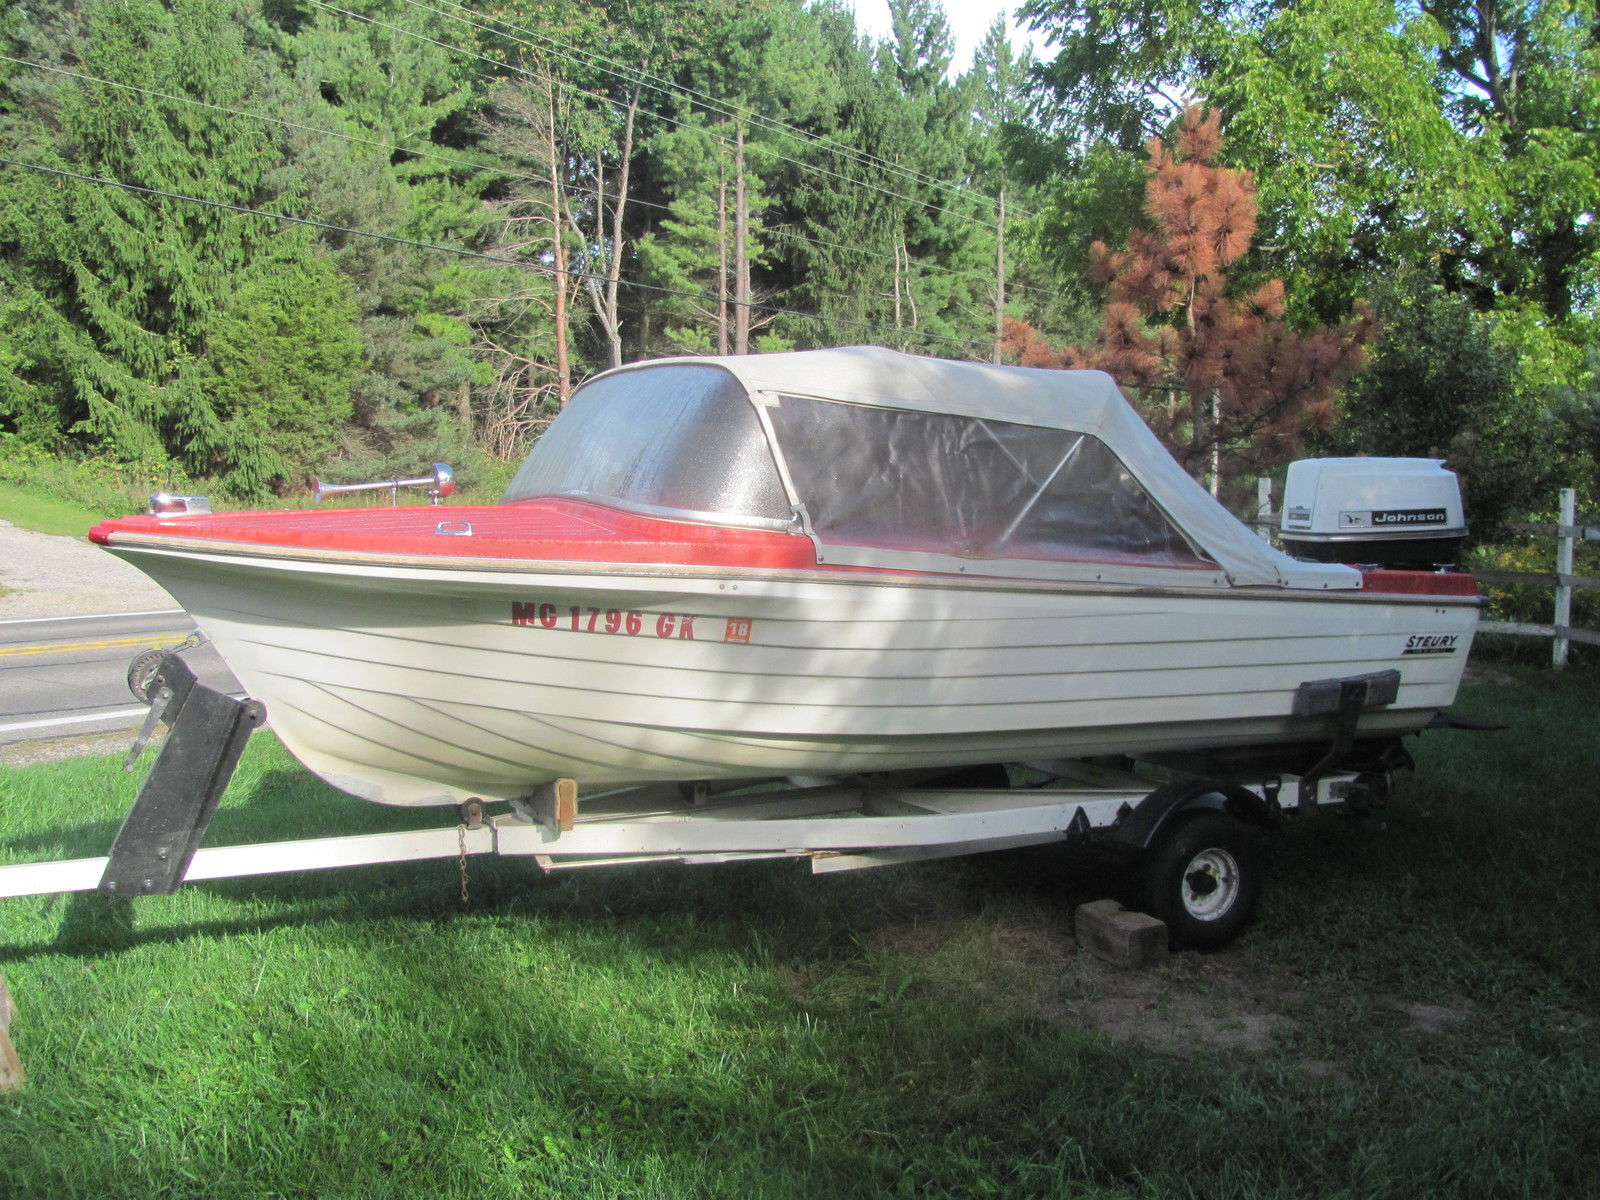 Steury 15' 1964 for sale for $1,950 - Boats-from-USA.com